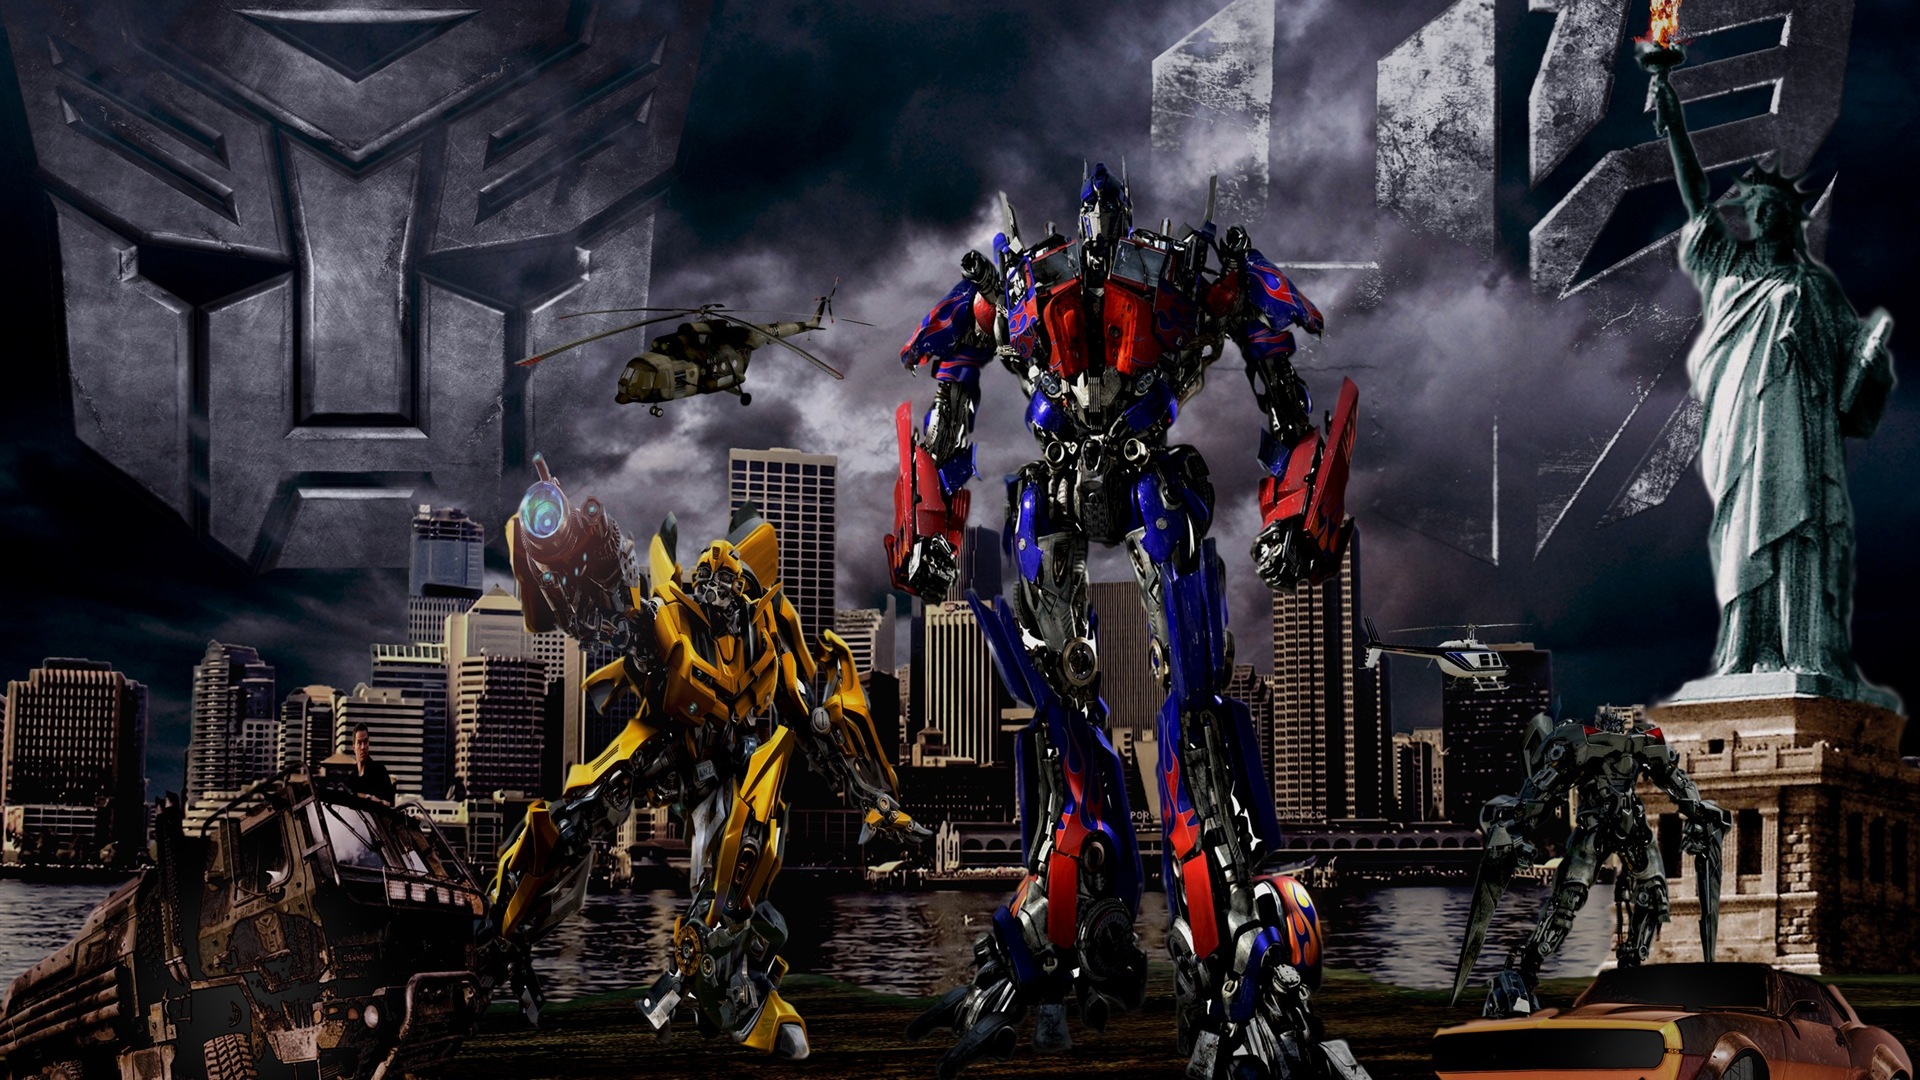 2014 Transformers: Age of Extinction HD tapety #8 - 1920x1080